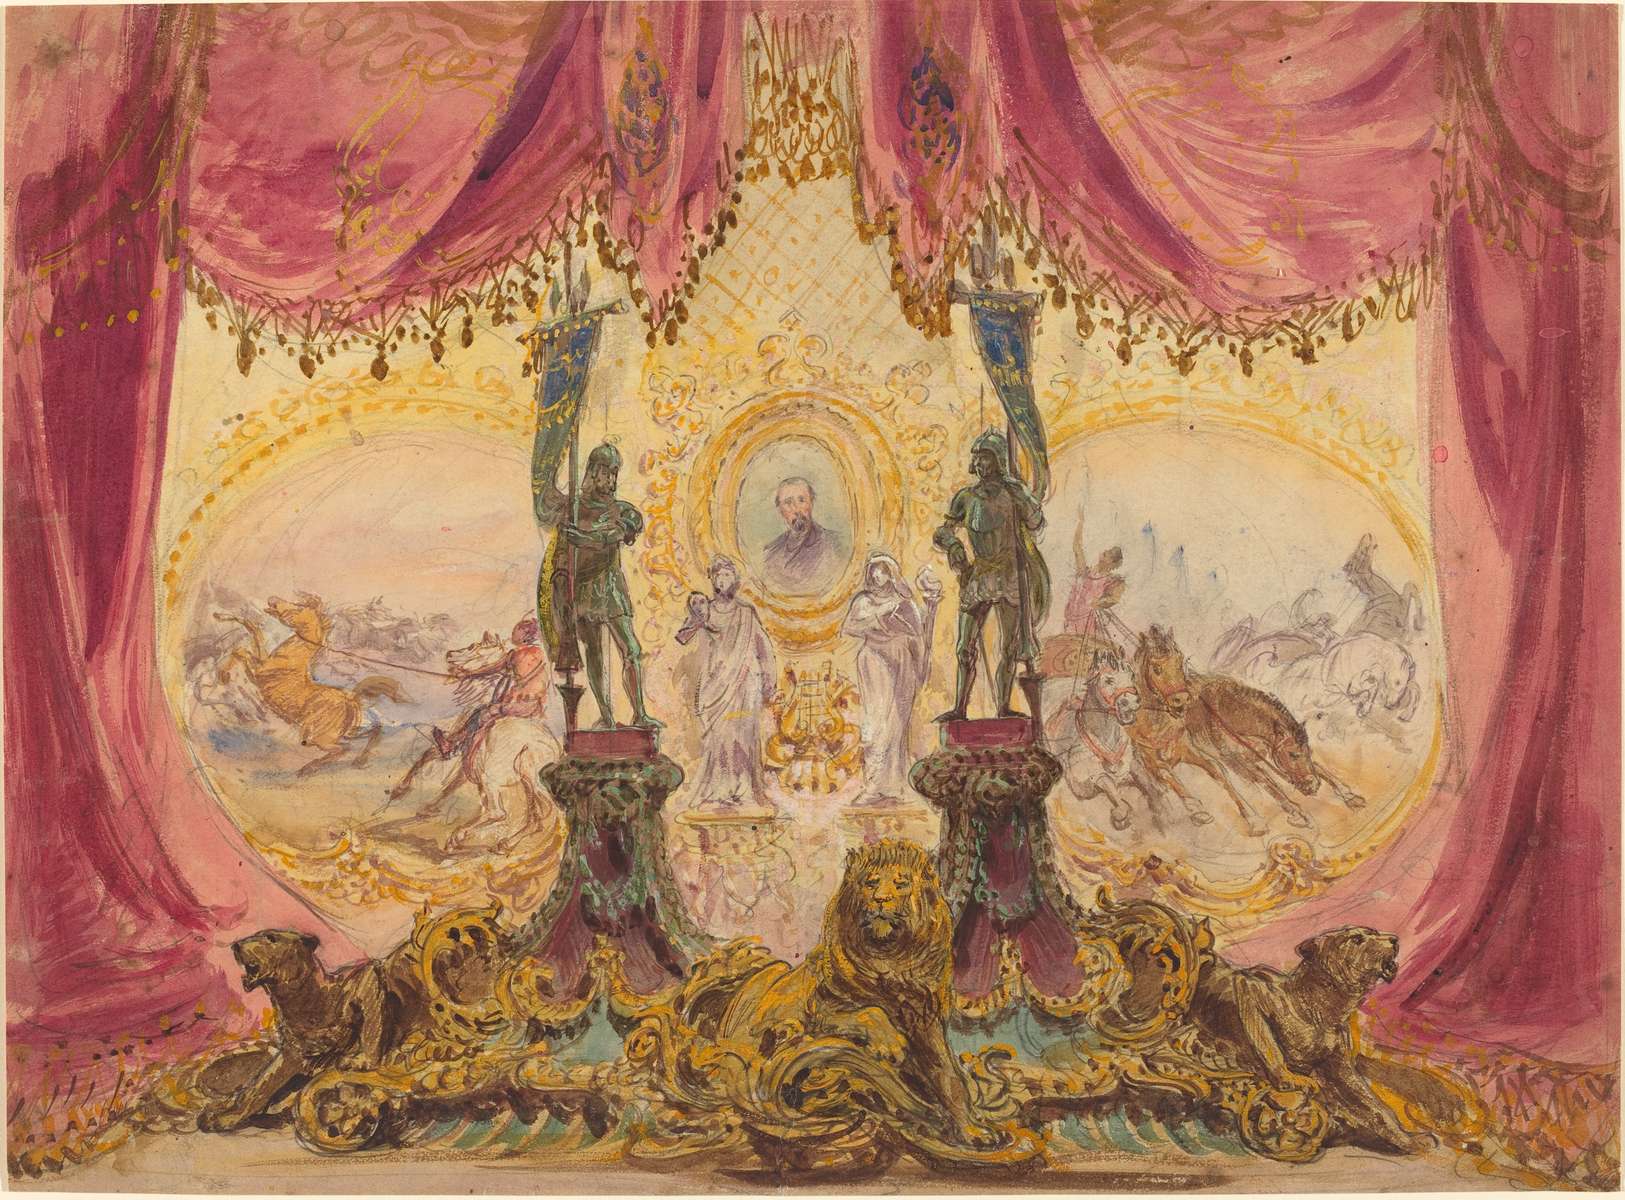 Robert Caney (British, 1847 - 1911 ), Stage Set With Paintings And Statues, , watercolor and gouache, heightened with white, over graphite, Joseph F. McCrindle Collection